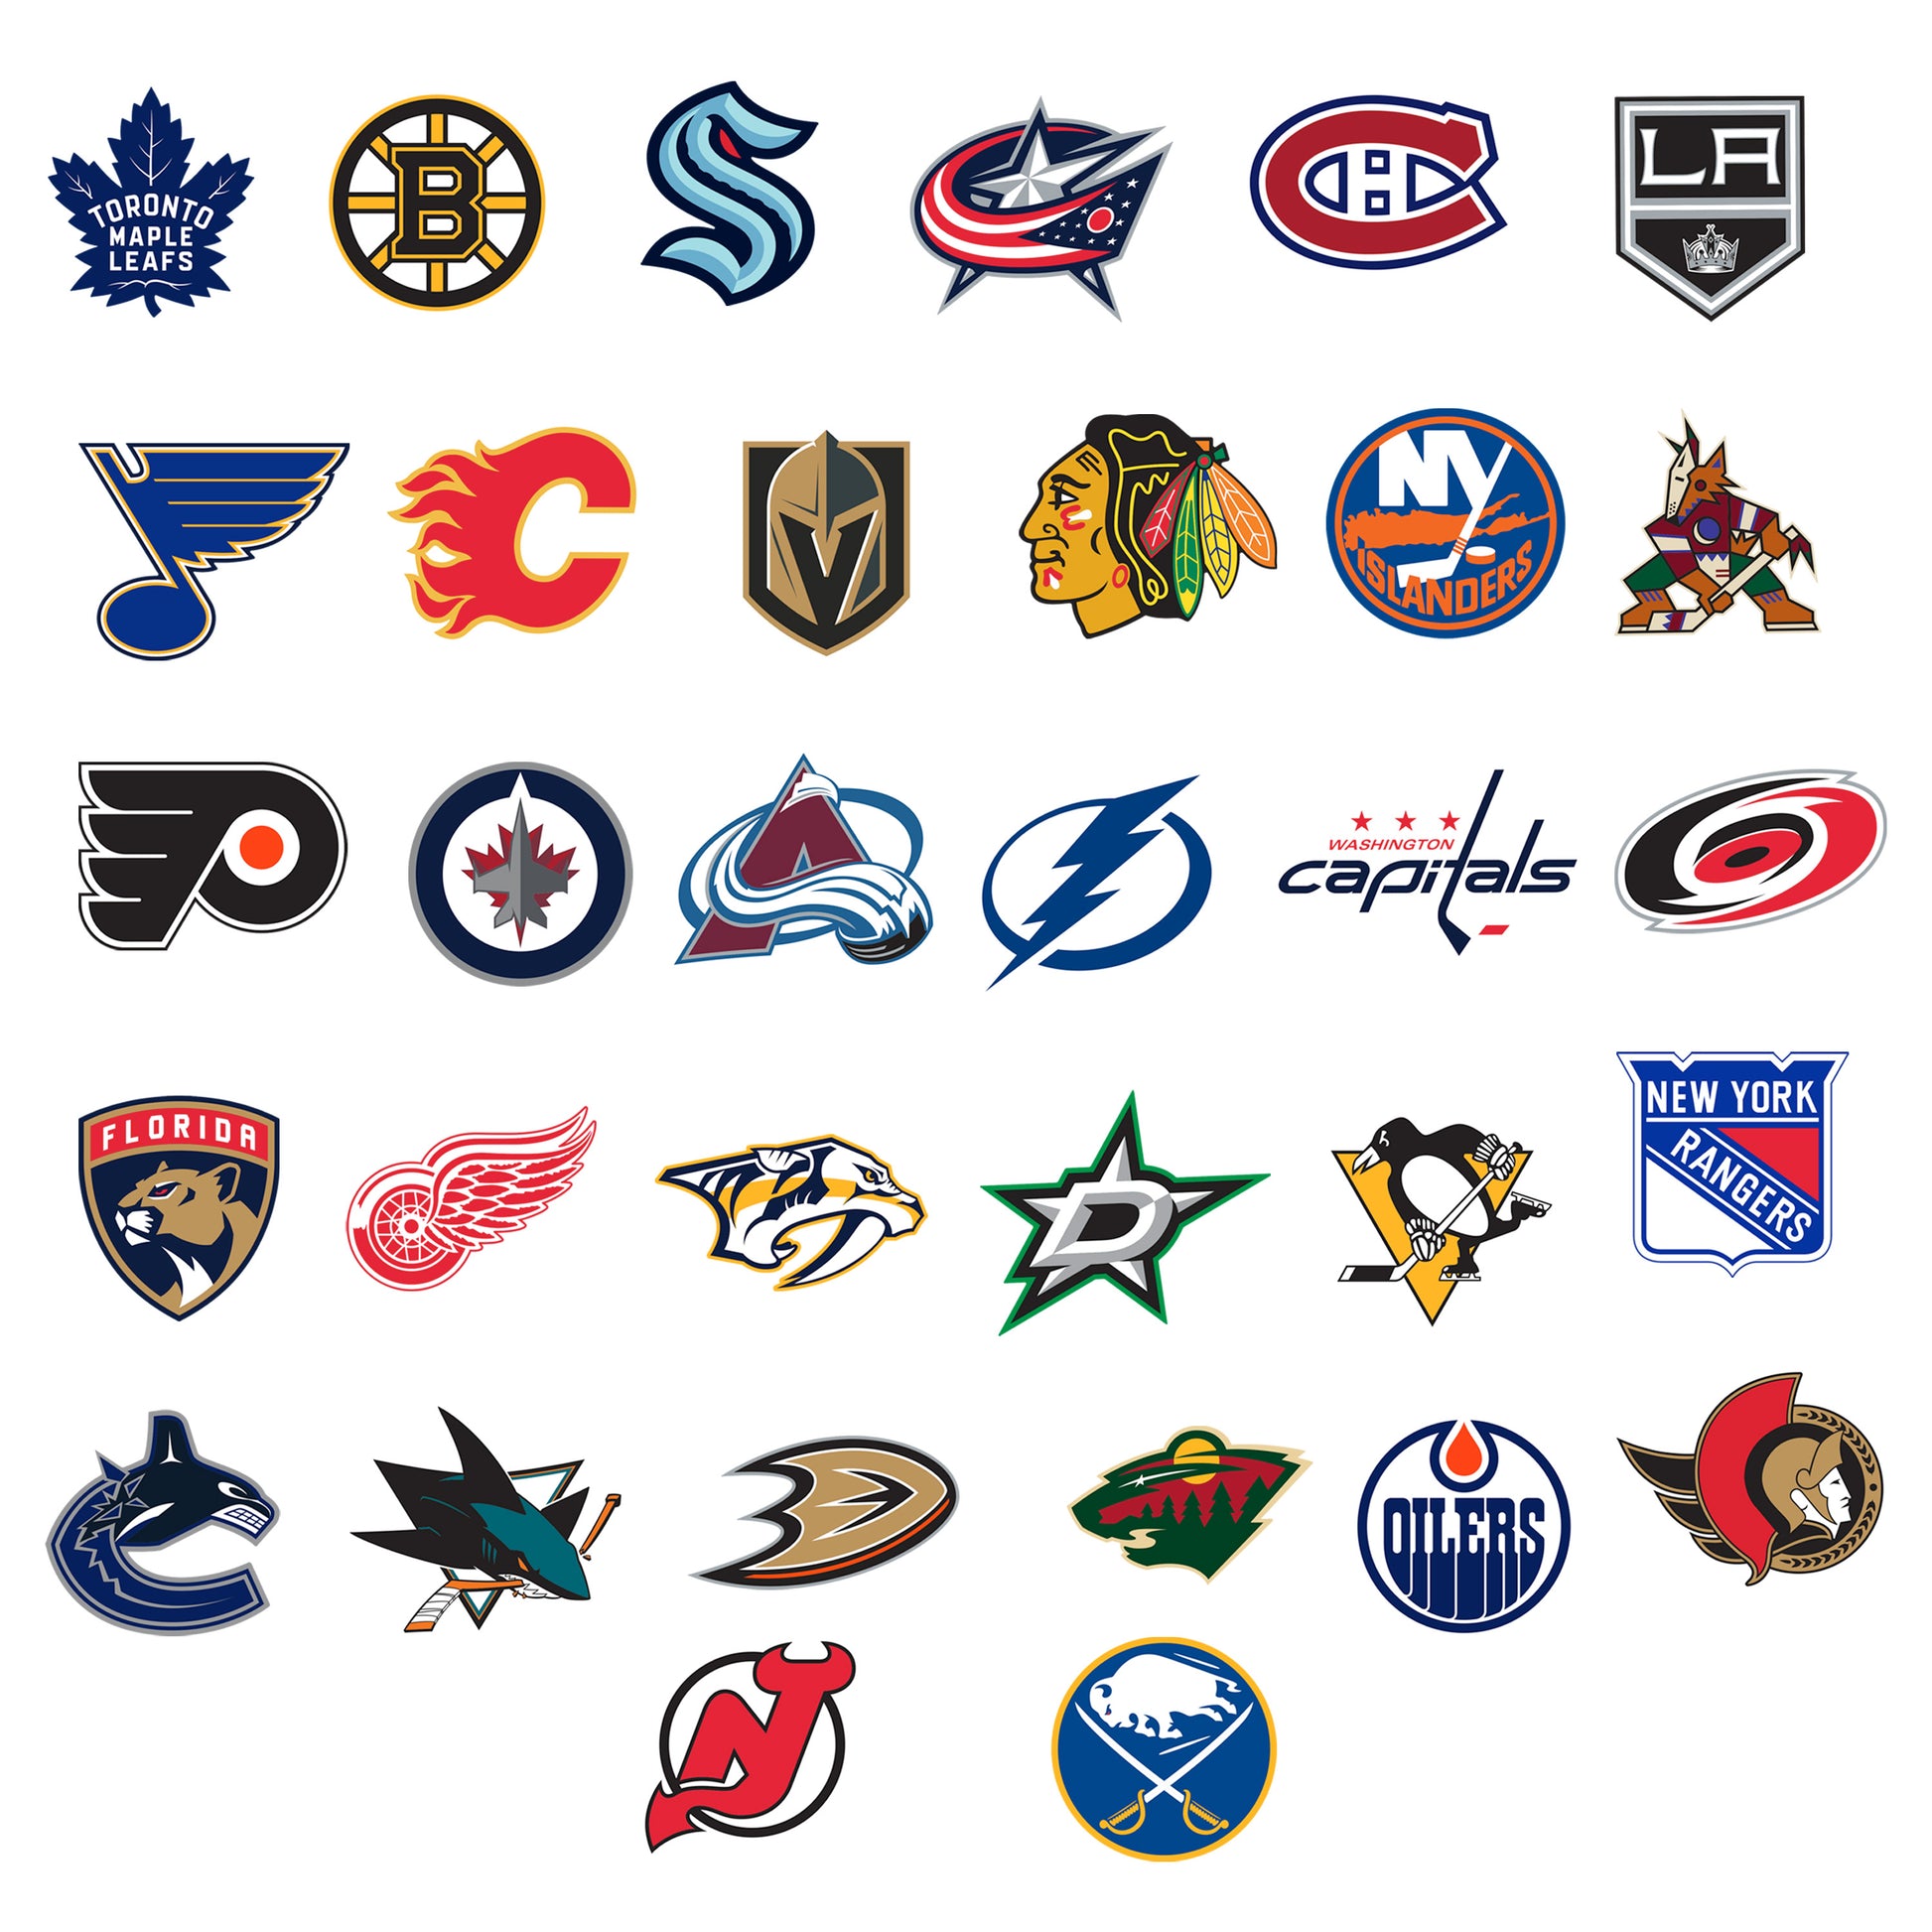 Stanley Cup - Officially Licensed NHL Removable Wall Decal – Fathead